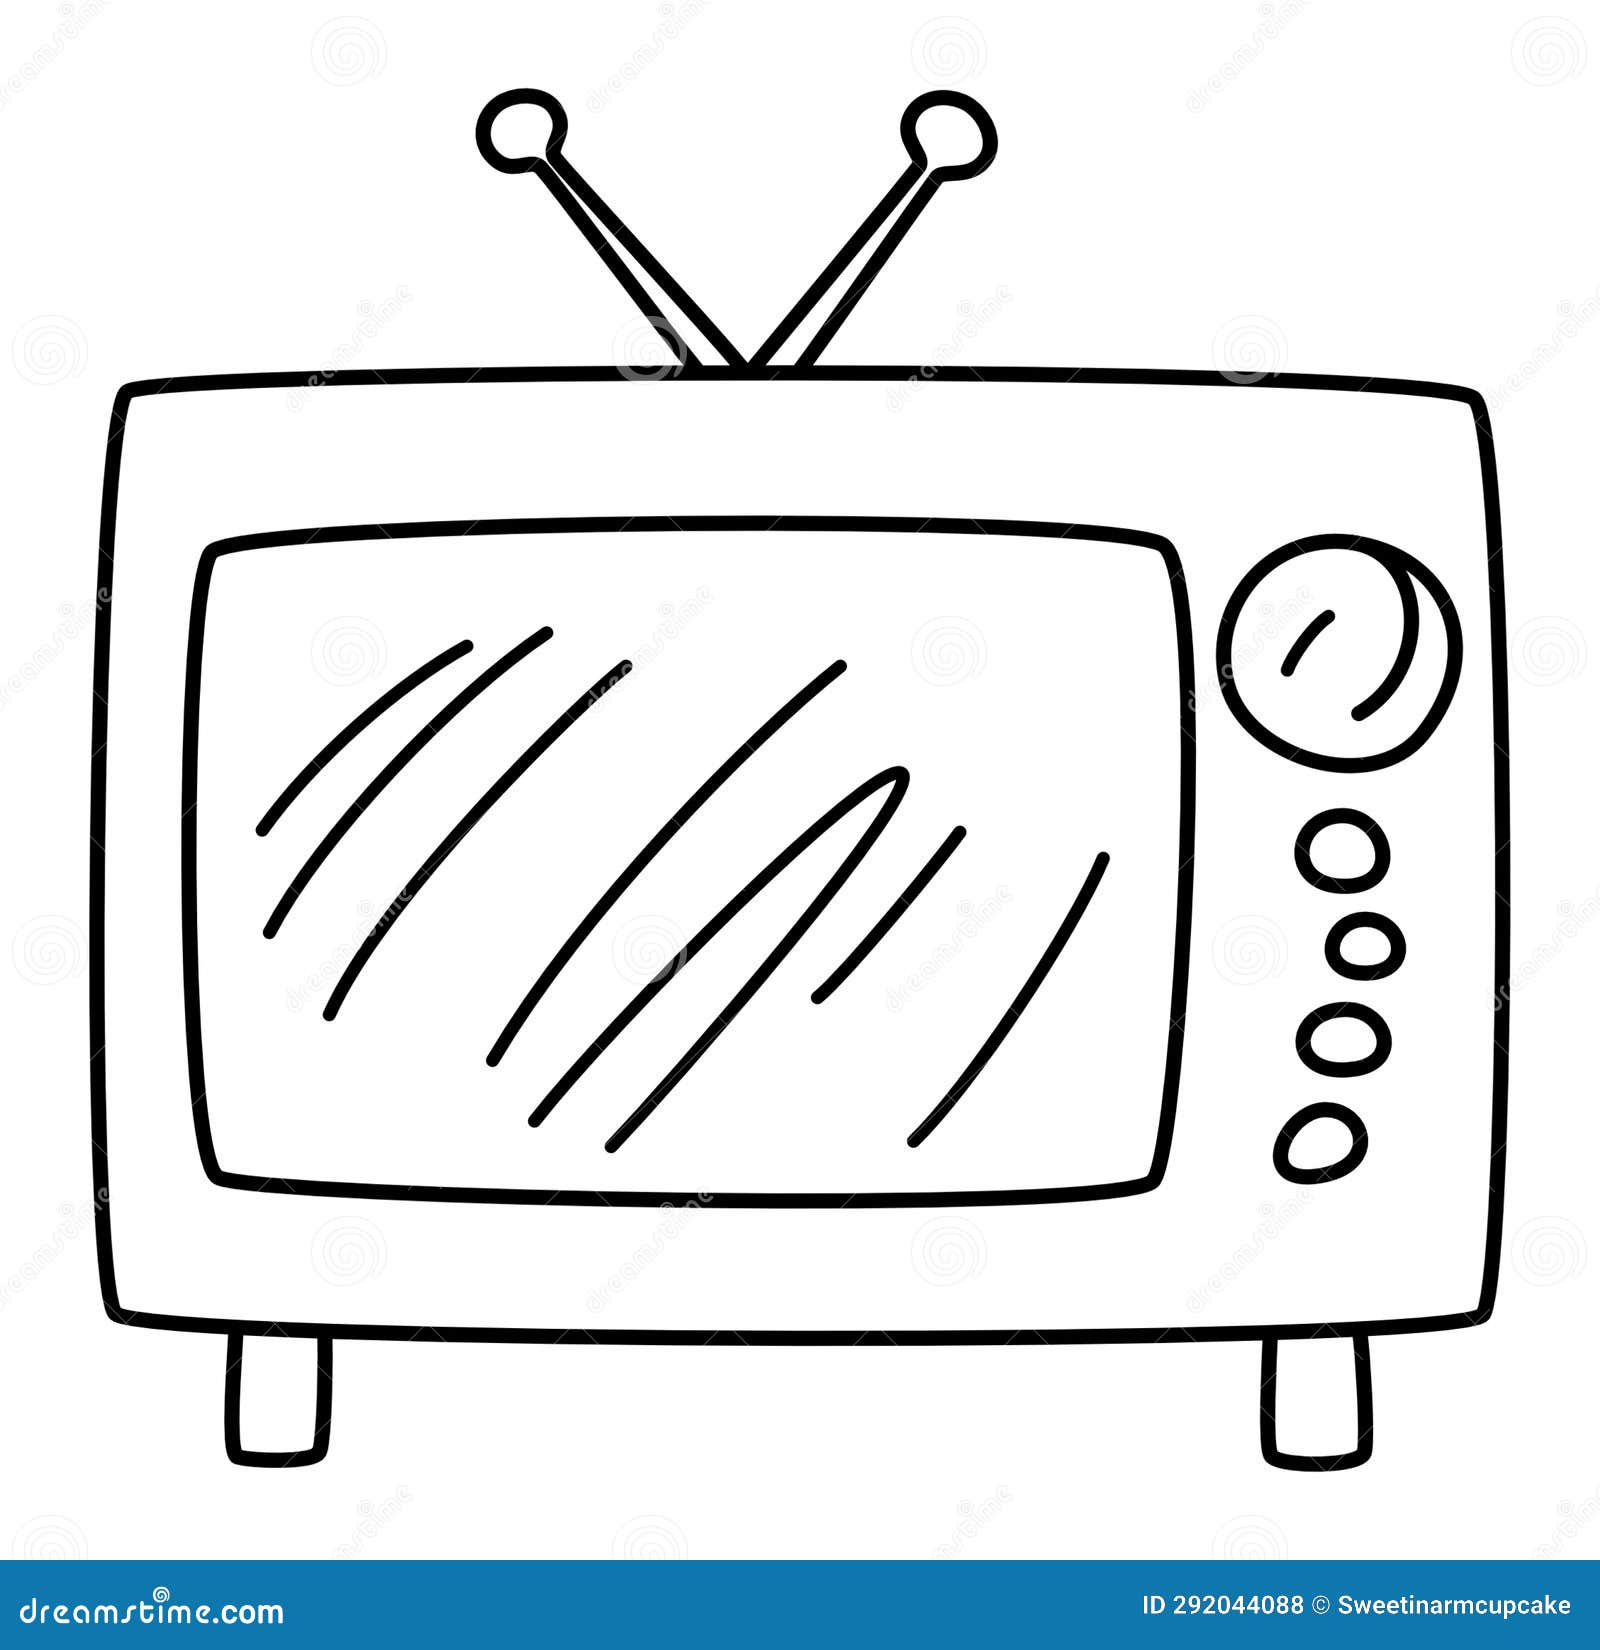 Television - Vintage and Retro Classic Style Old TV in the Past with ...